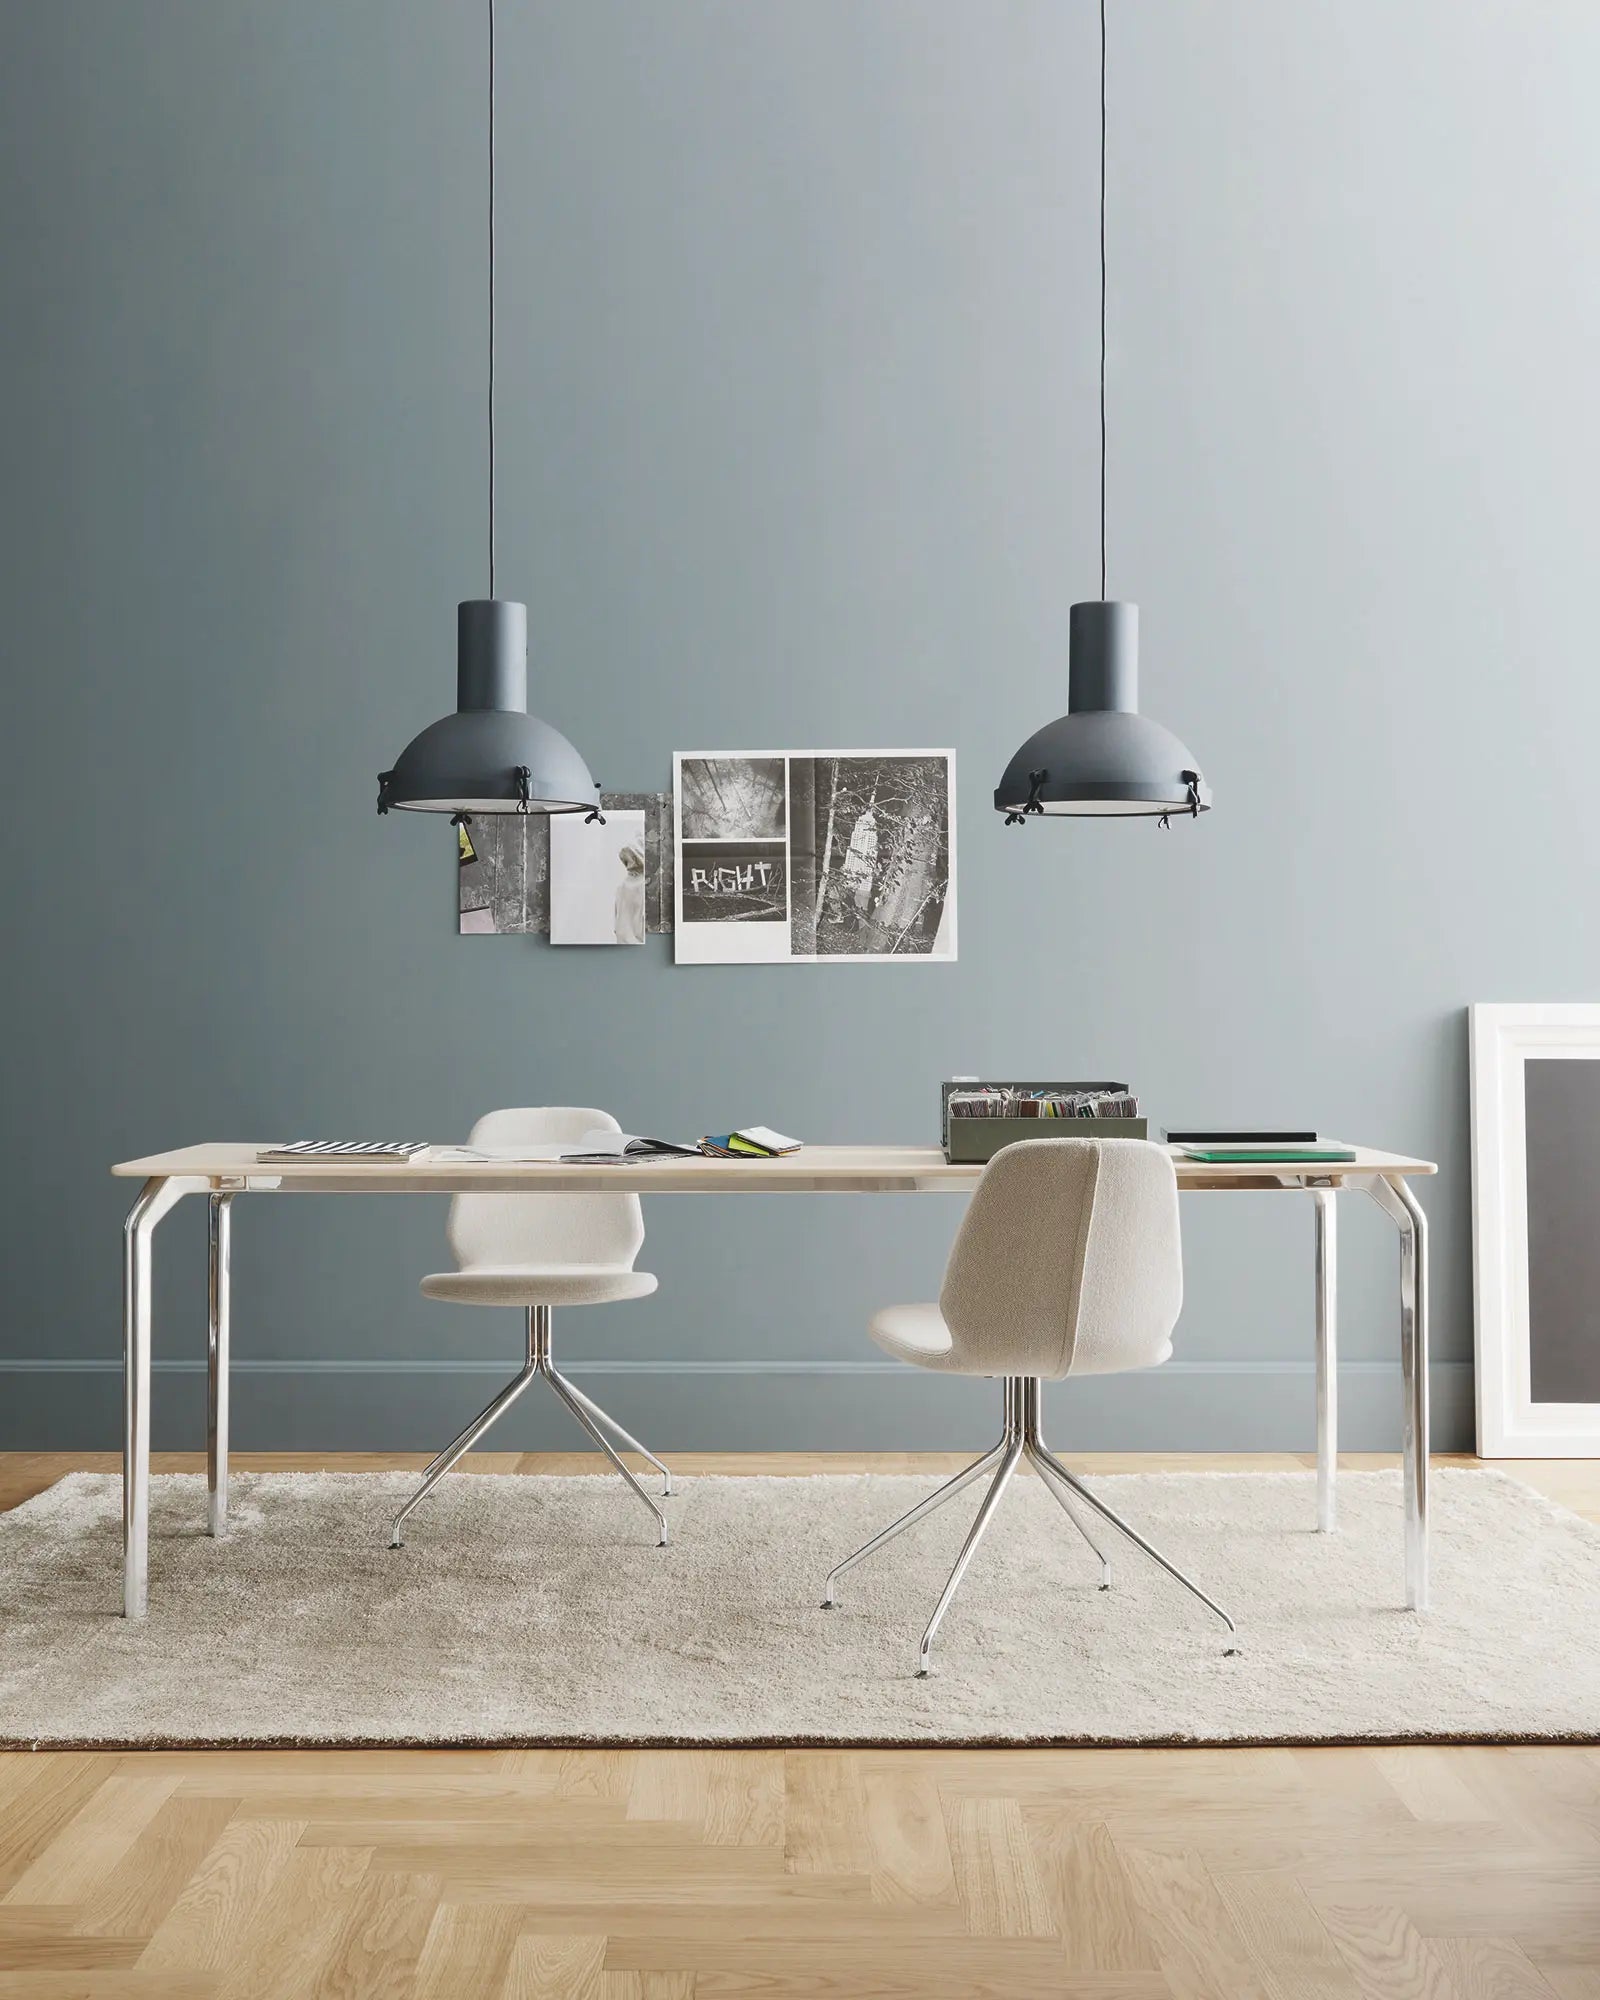 Projecteur classic iconic pendant light cluster above a meeting table